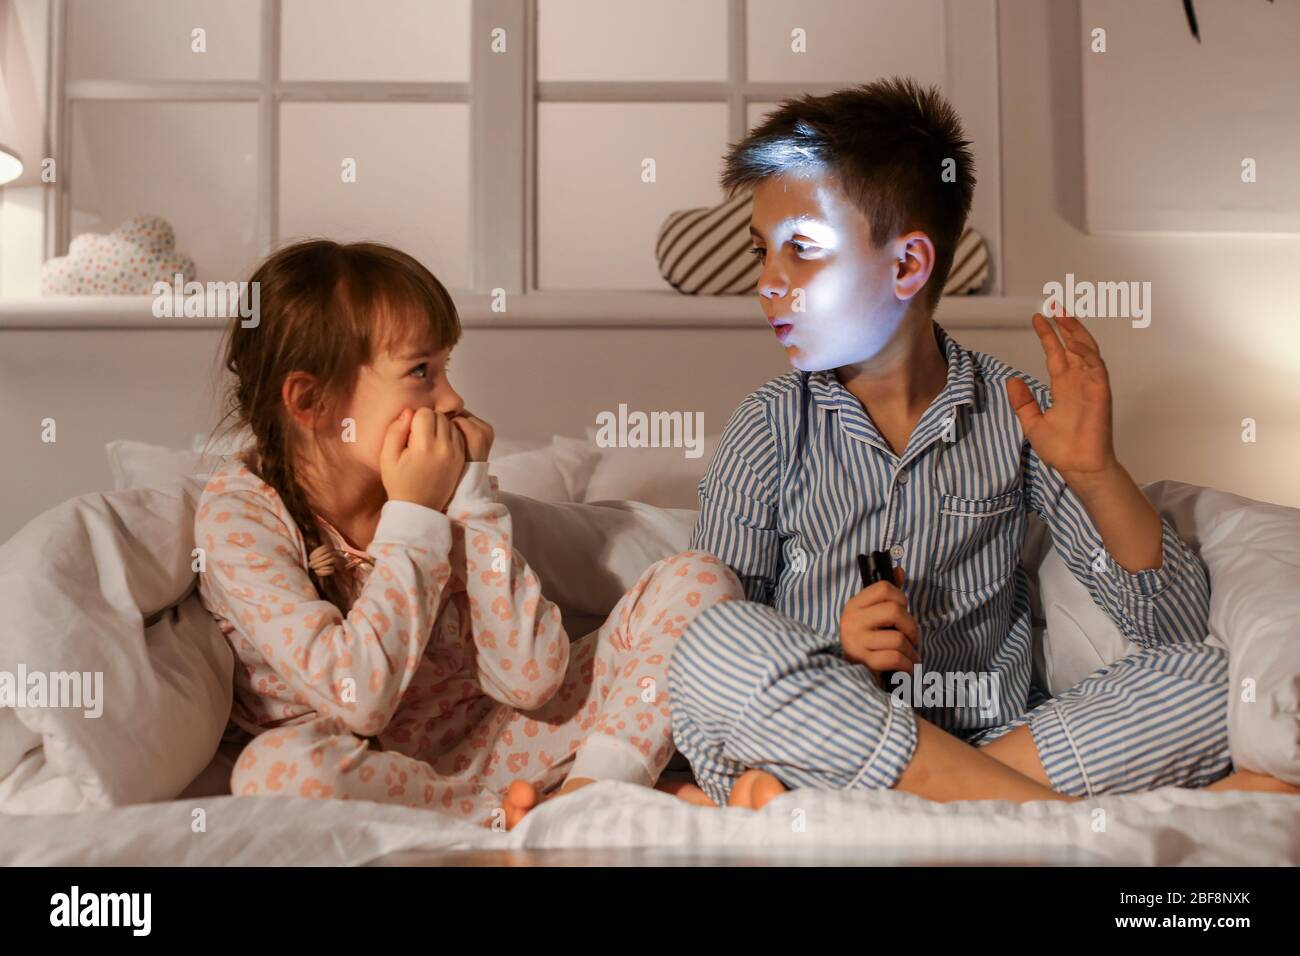 Emotional little children in bedroom at home Stock Photo